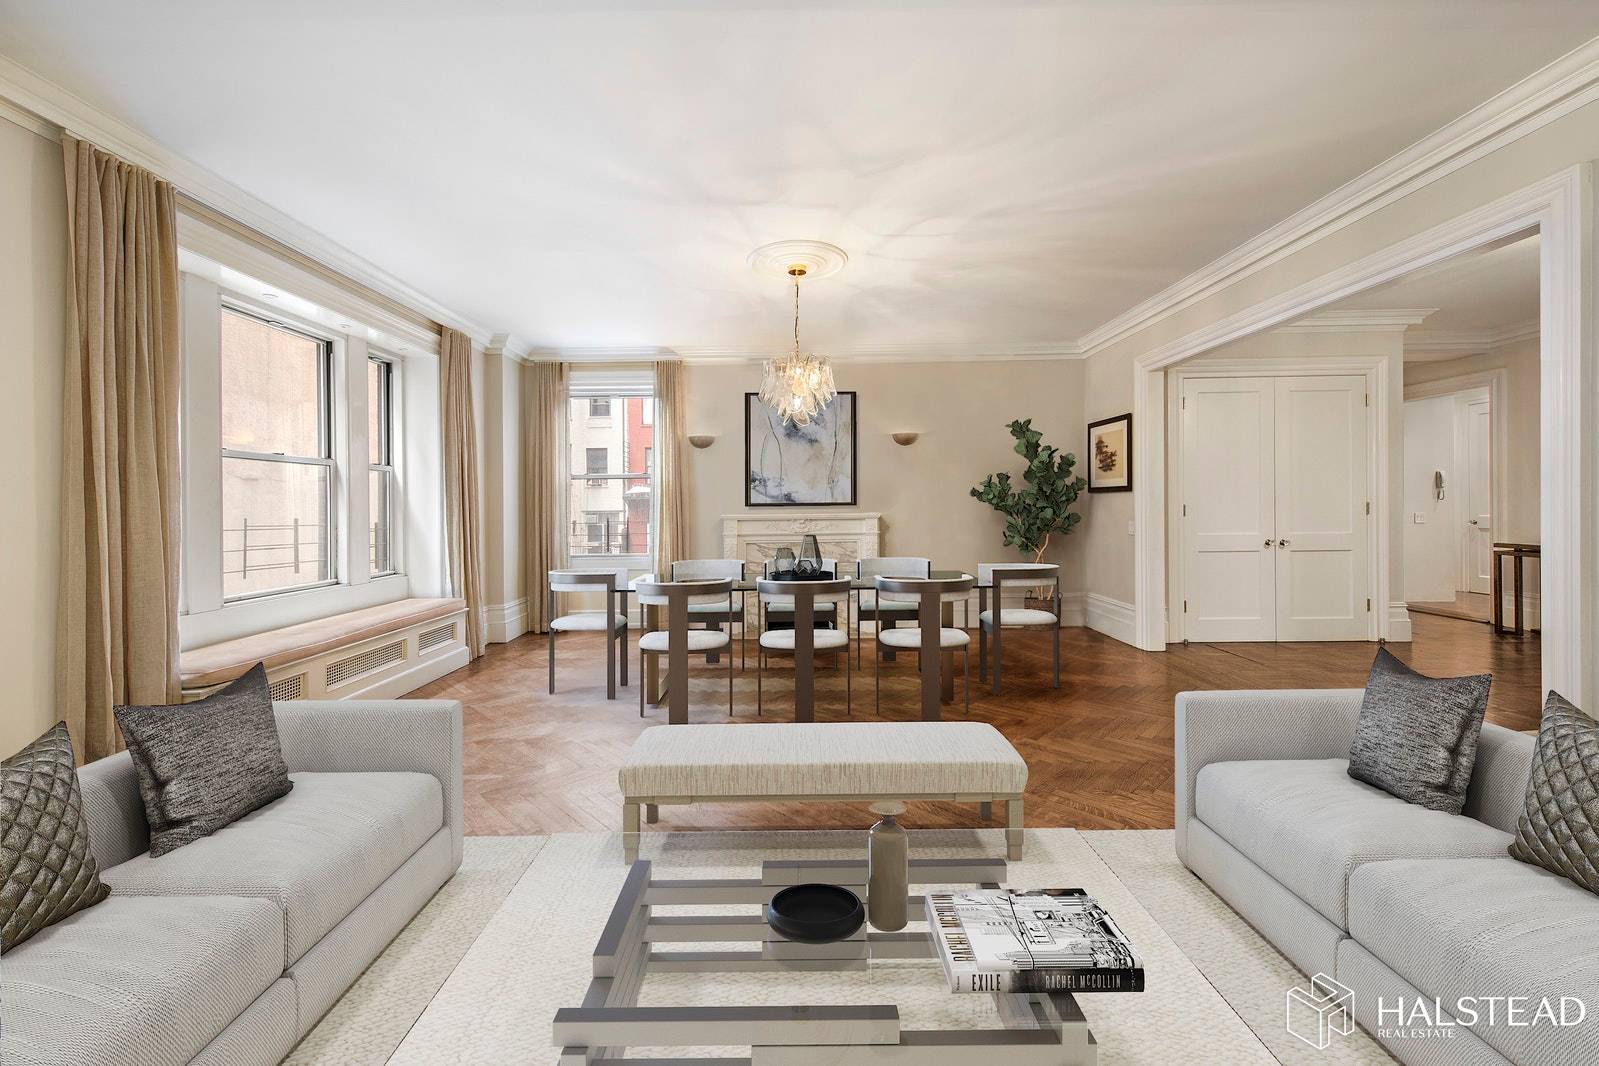 Substantial 4 bedroom home located in one of the Upper West Side's premiere coops.